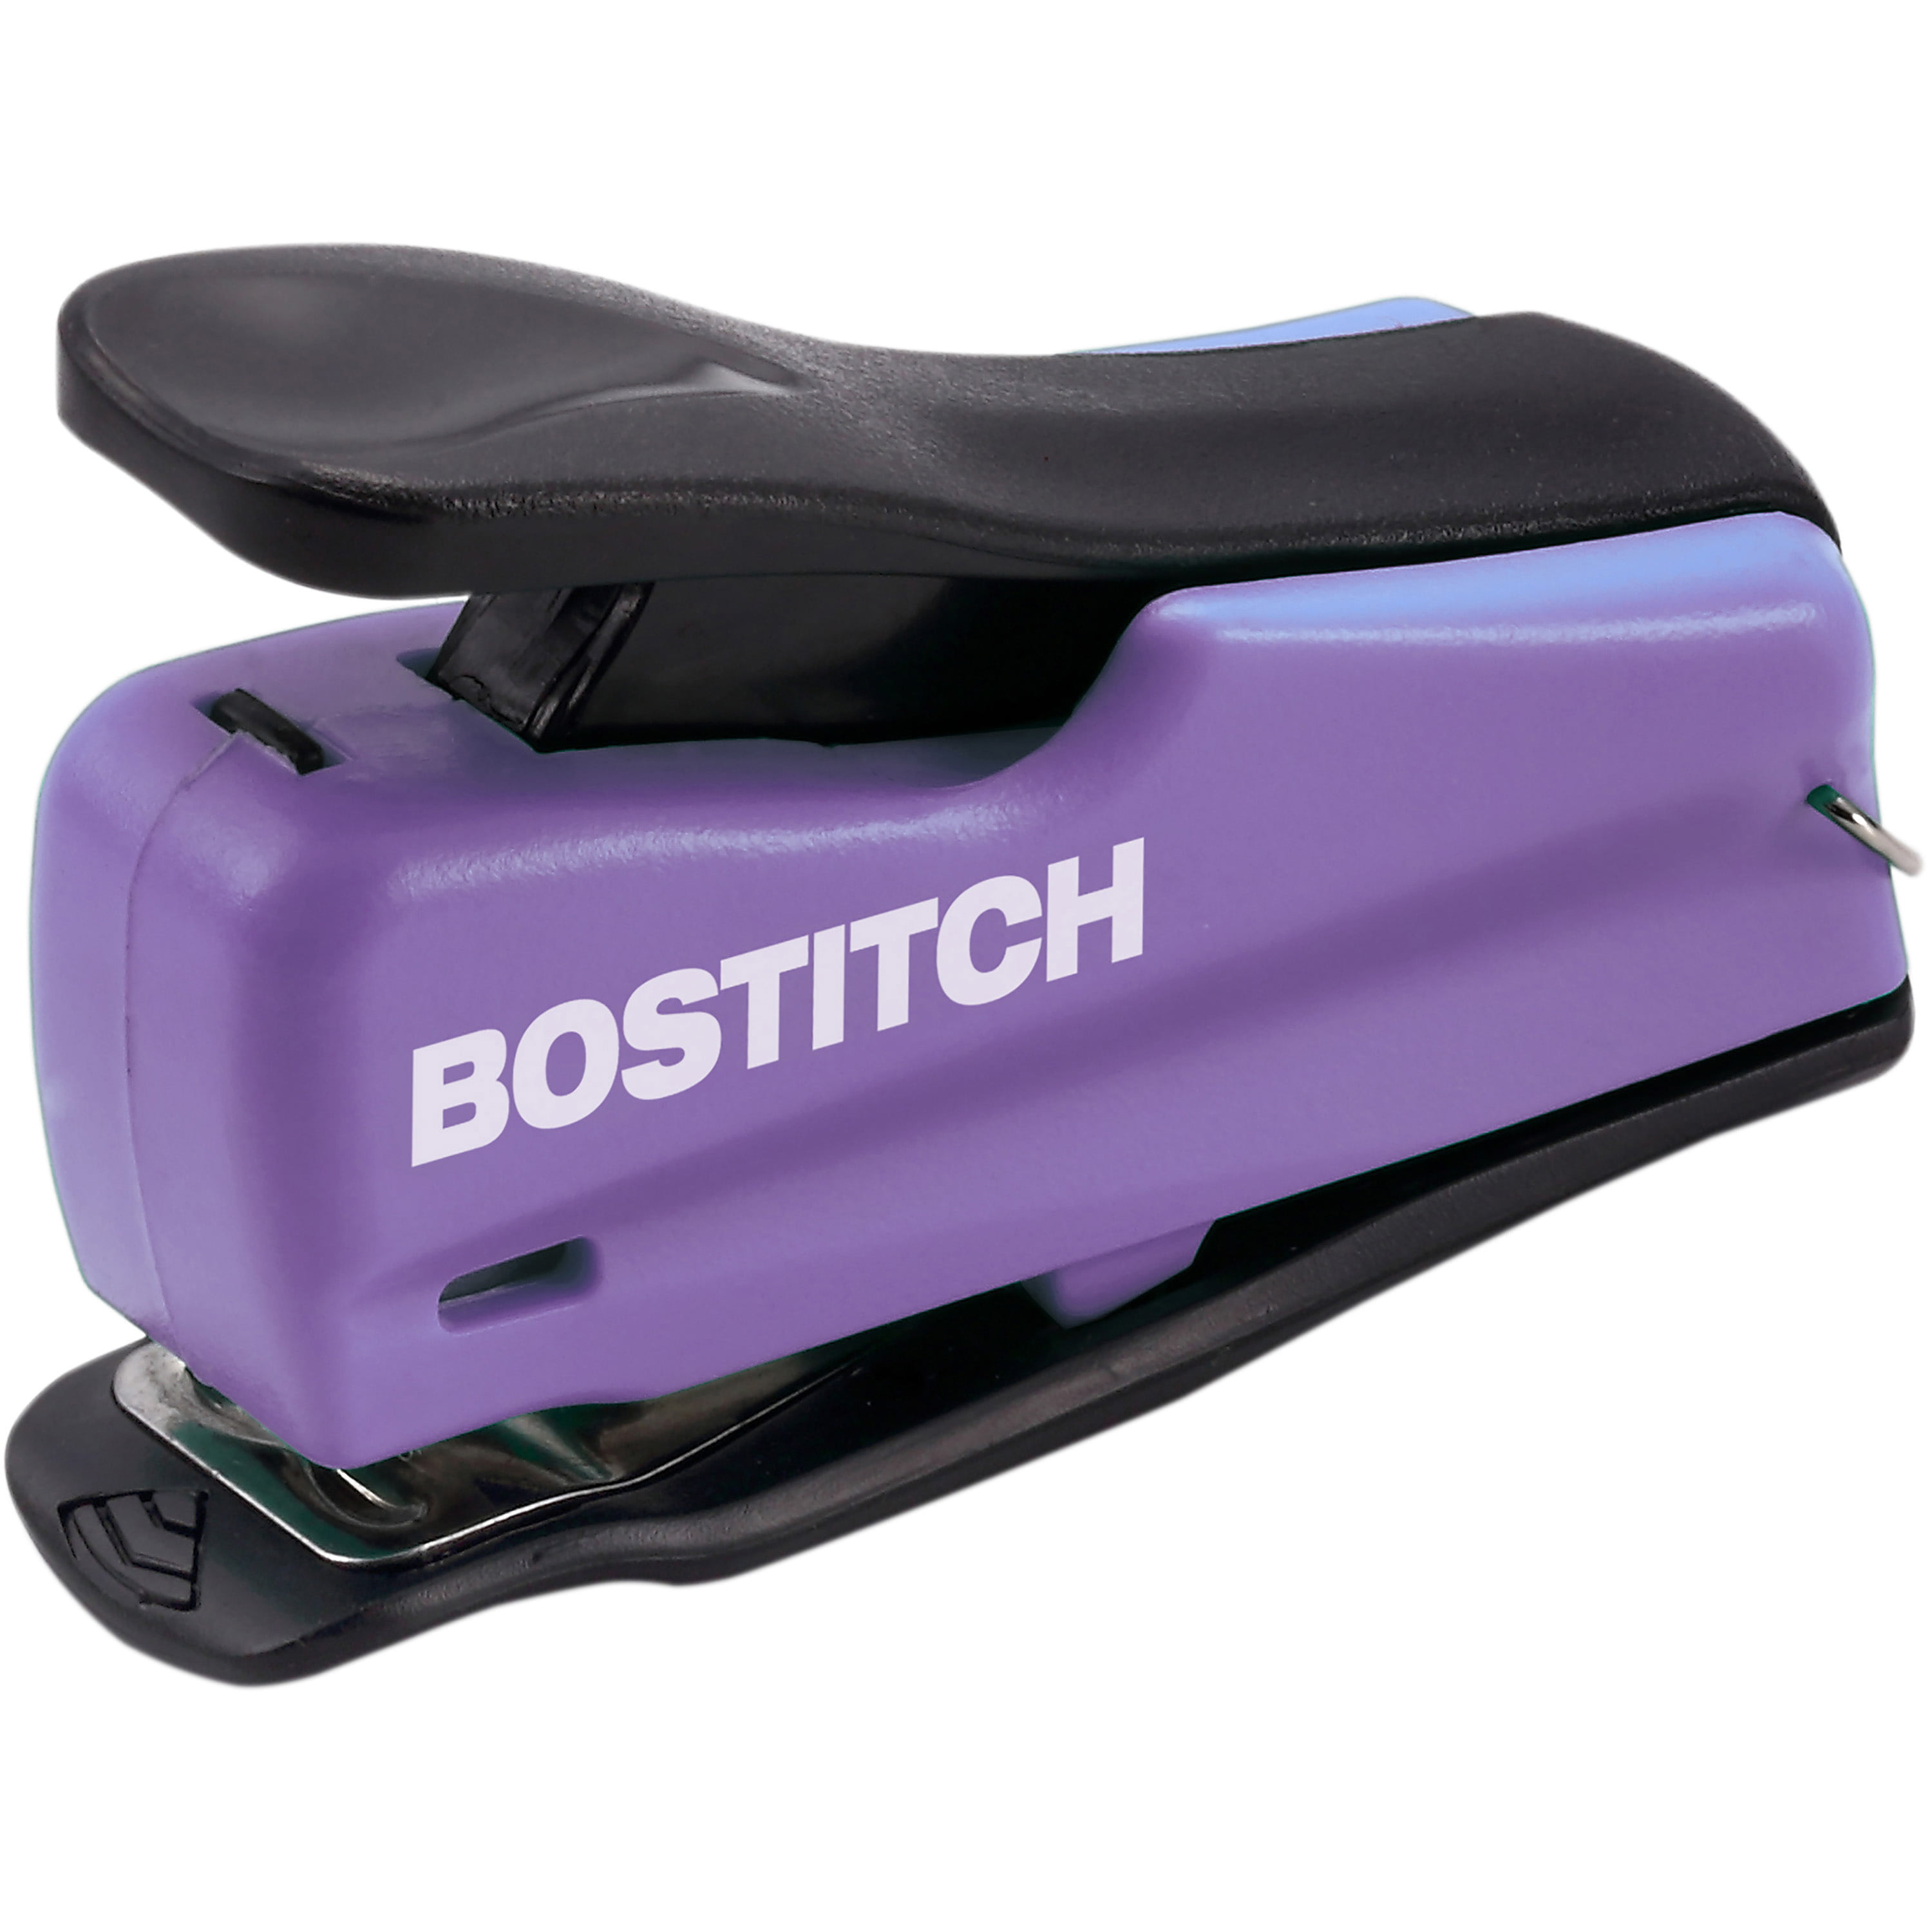 Fits into The Palm of Your Hand; Black Bostitch Office 20 Sheet Stapler Small Stapler Size B150-BLK